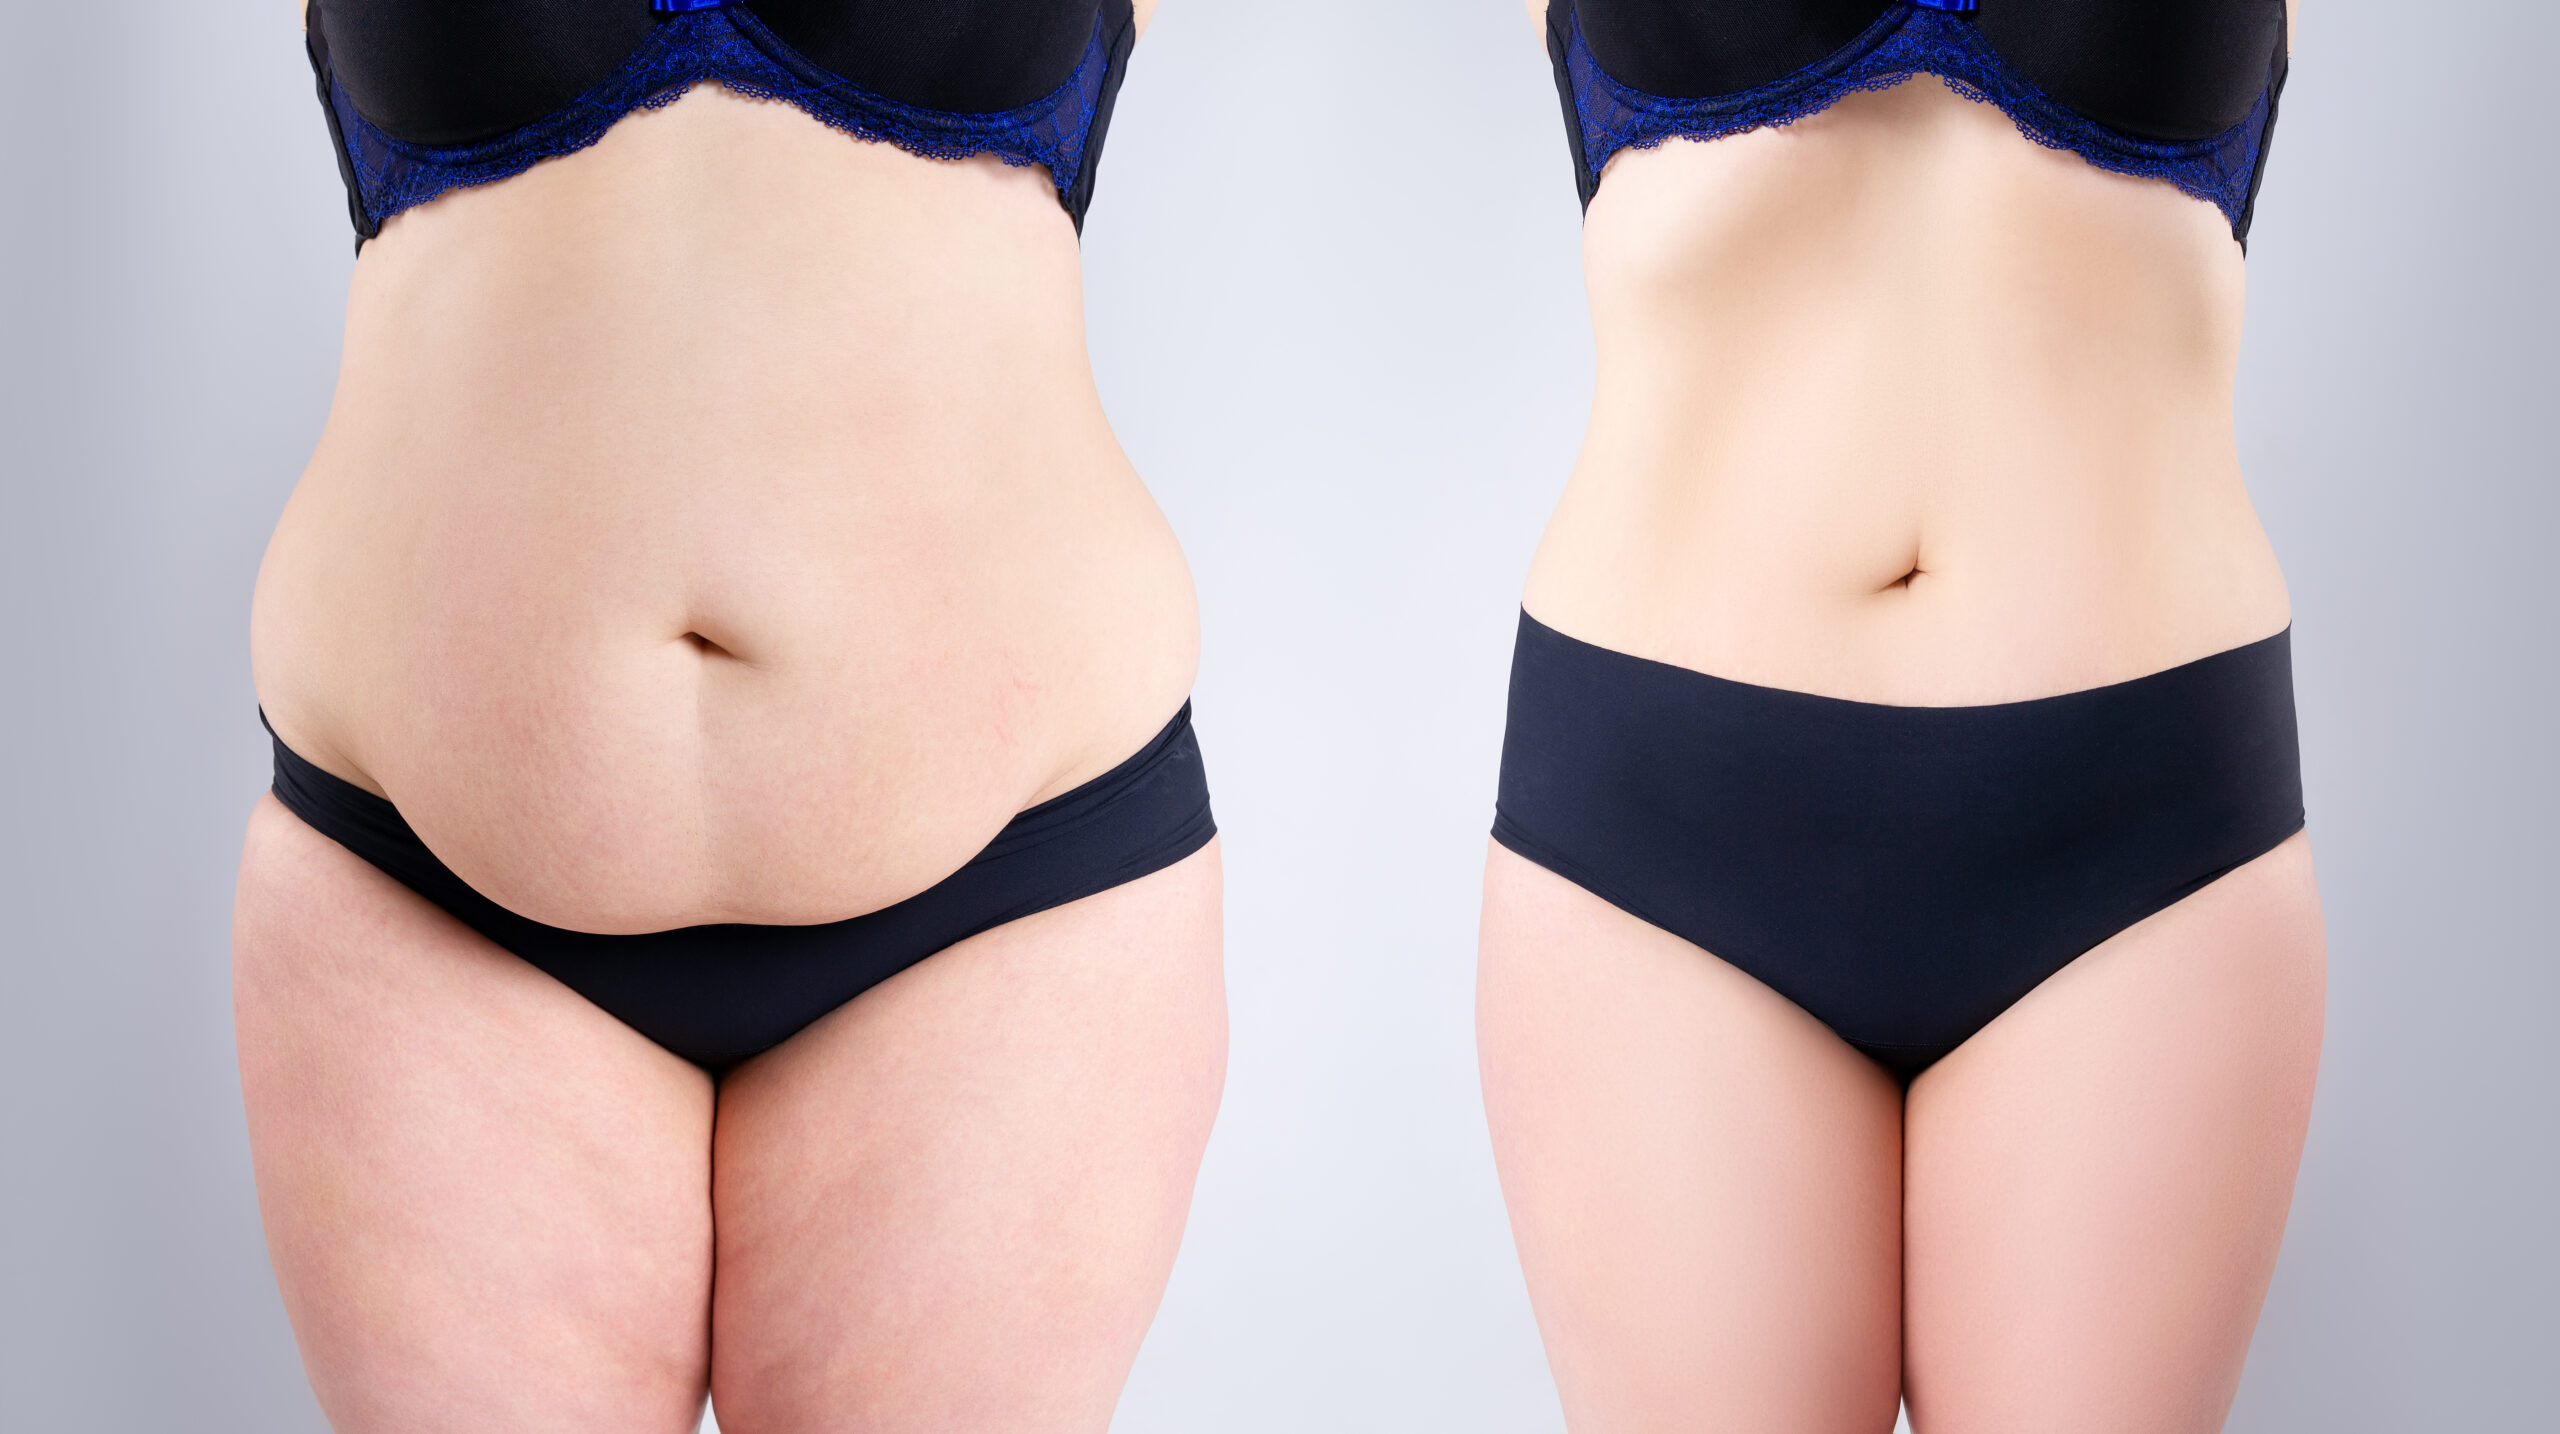 Body Contouring before and after treatment in Leominster, MA | Opulent Aesthetics and Wellness